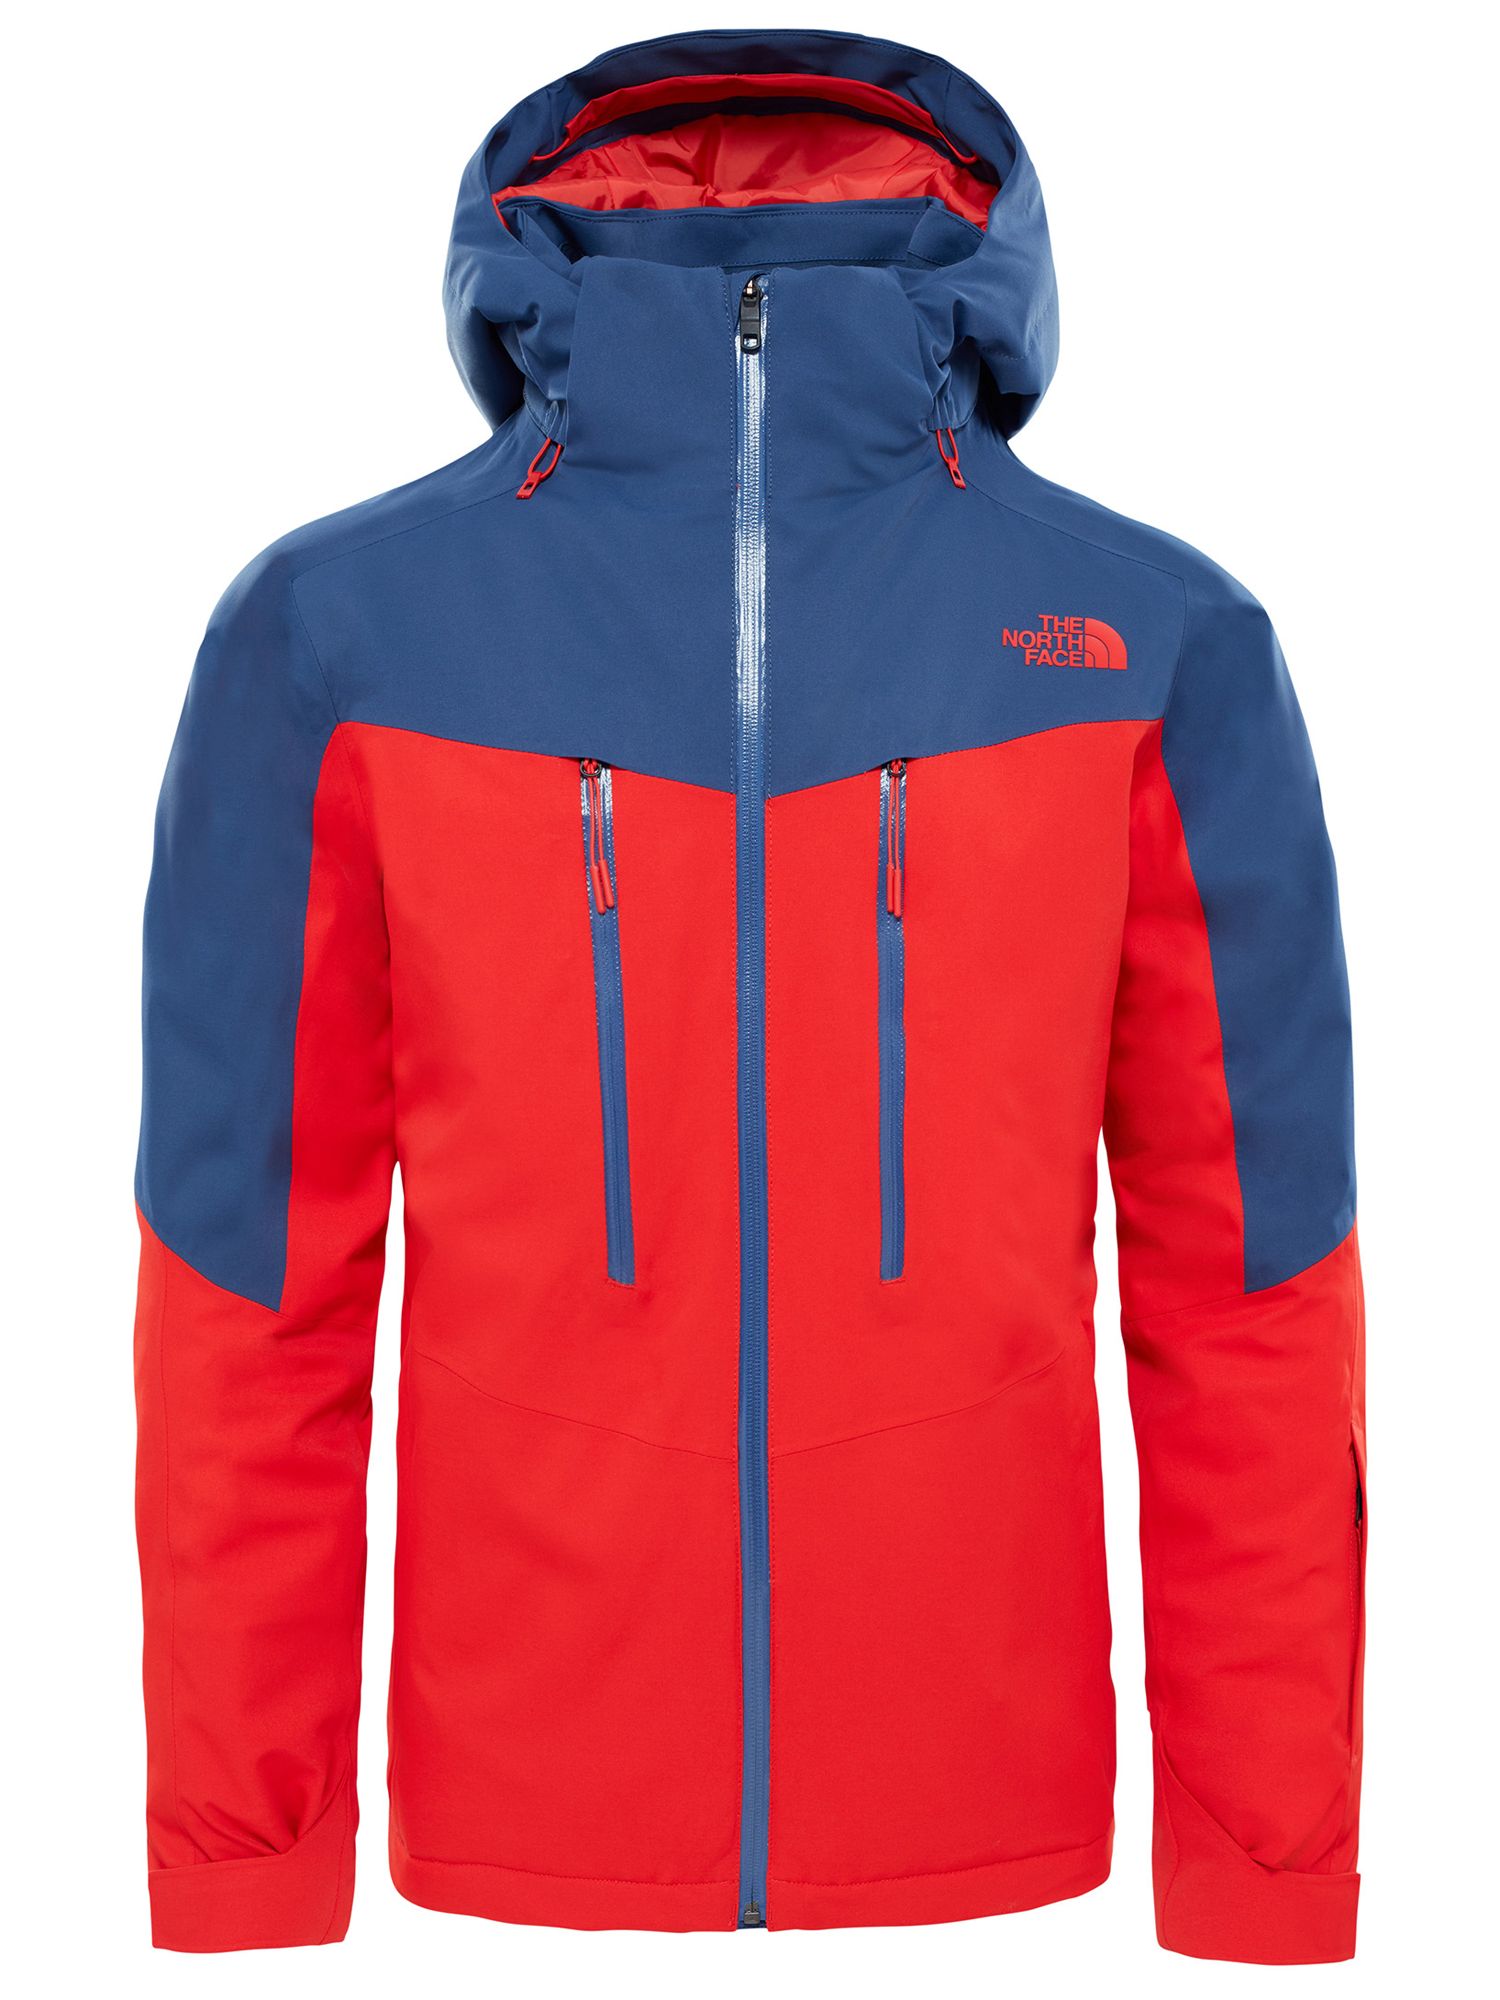 The North Face Chakal Waterproof Men's Ski Jacket, Blue/Red